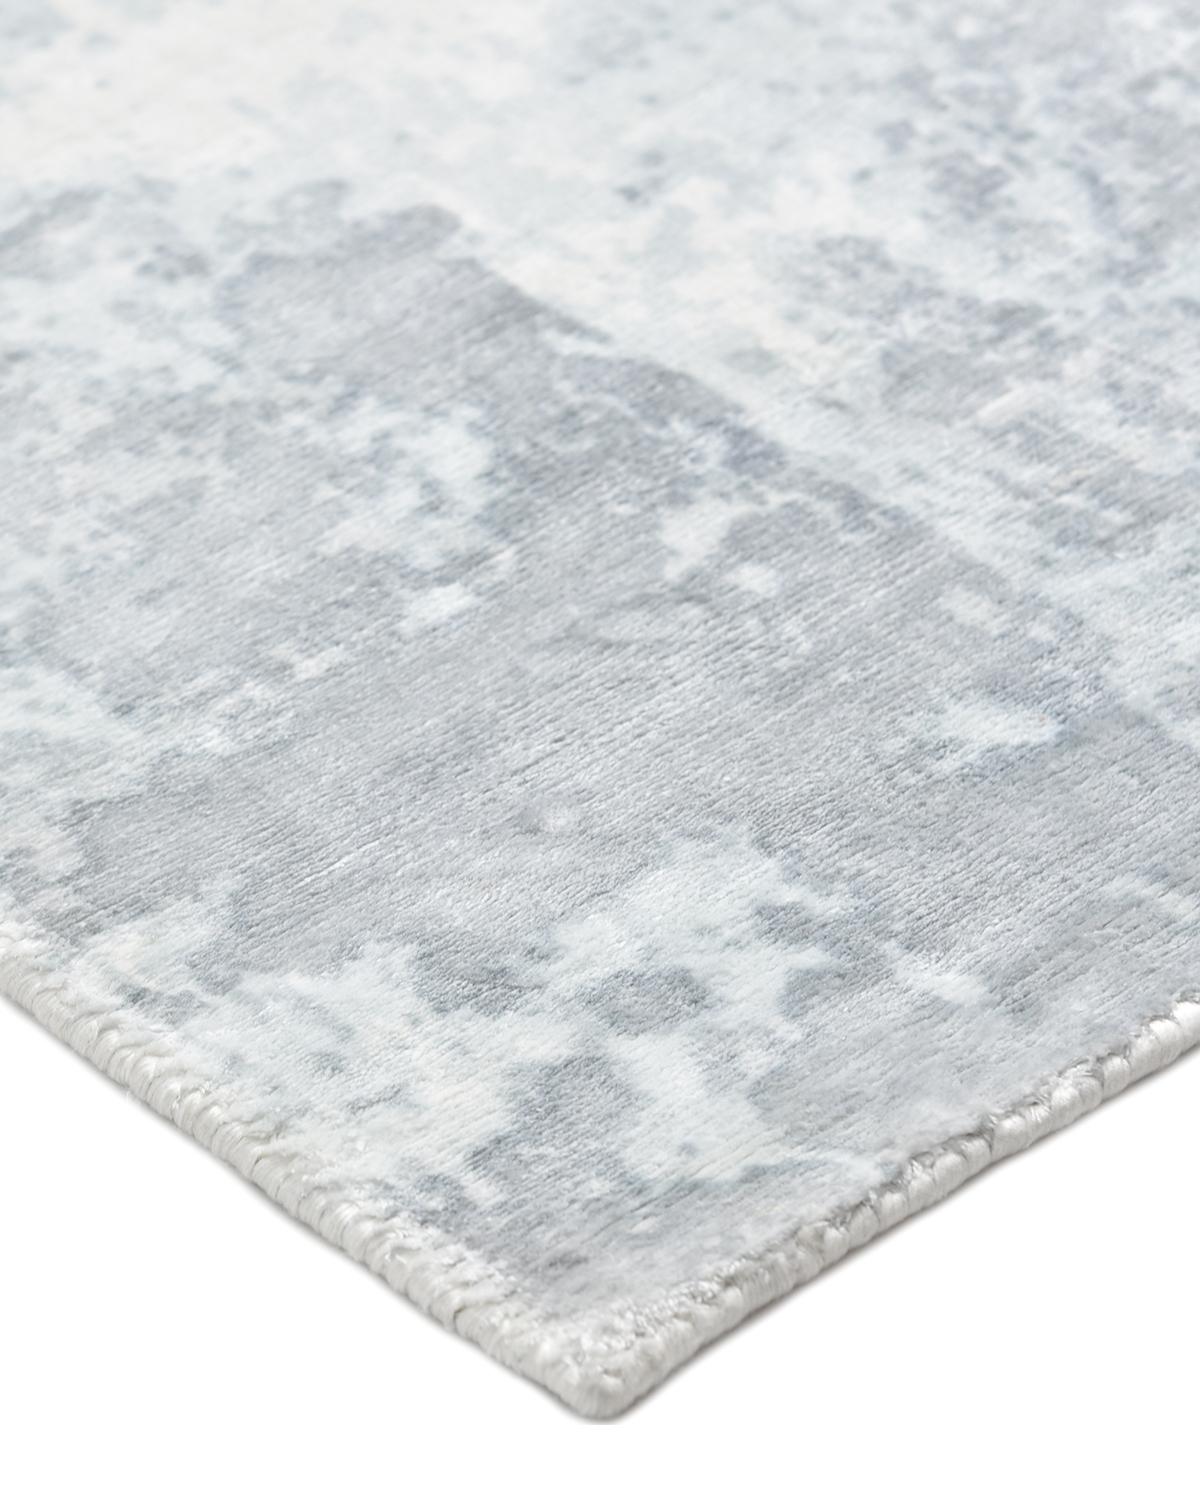 With their freeform motifs and sophisticated color play, the rugs in the Abstract collection imbue a room with a fresh, dynamic spirit. They also bring an imprimatur of timeless luxury, thanks to the artisans who handcraft them using the